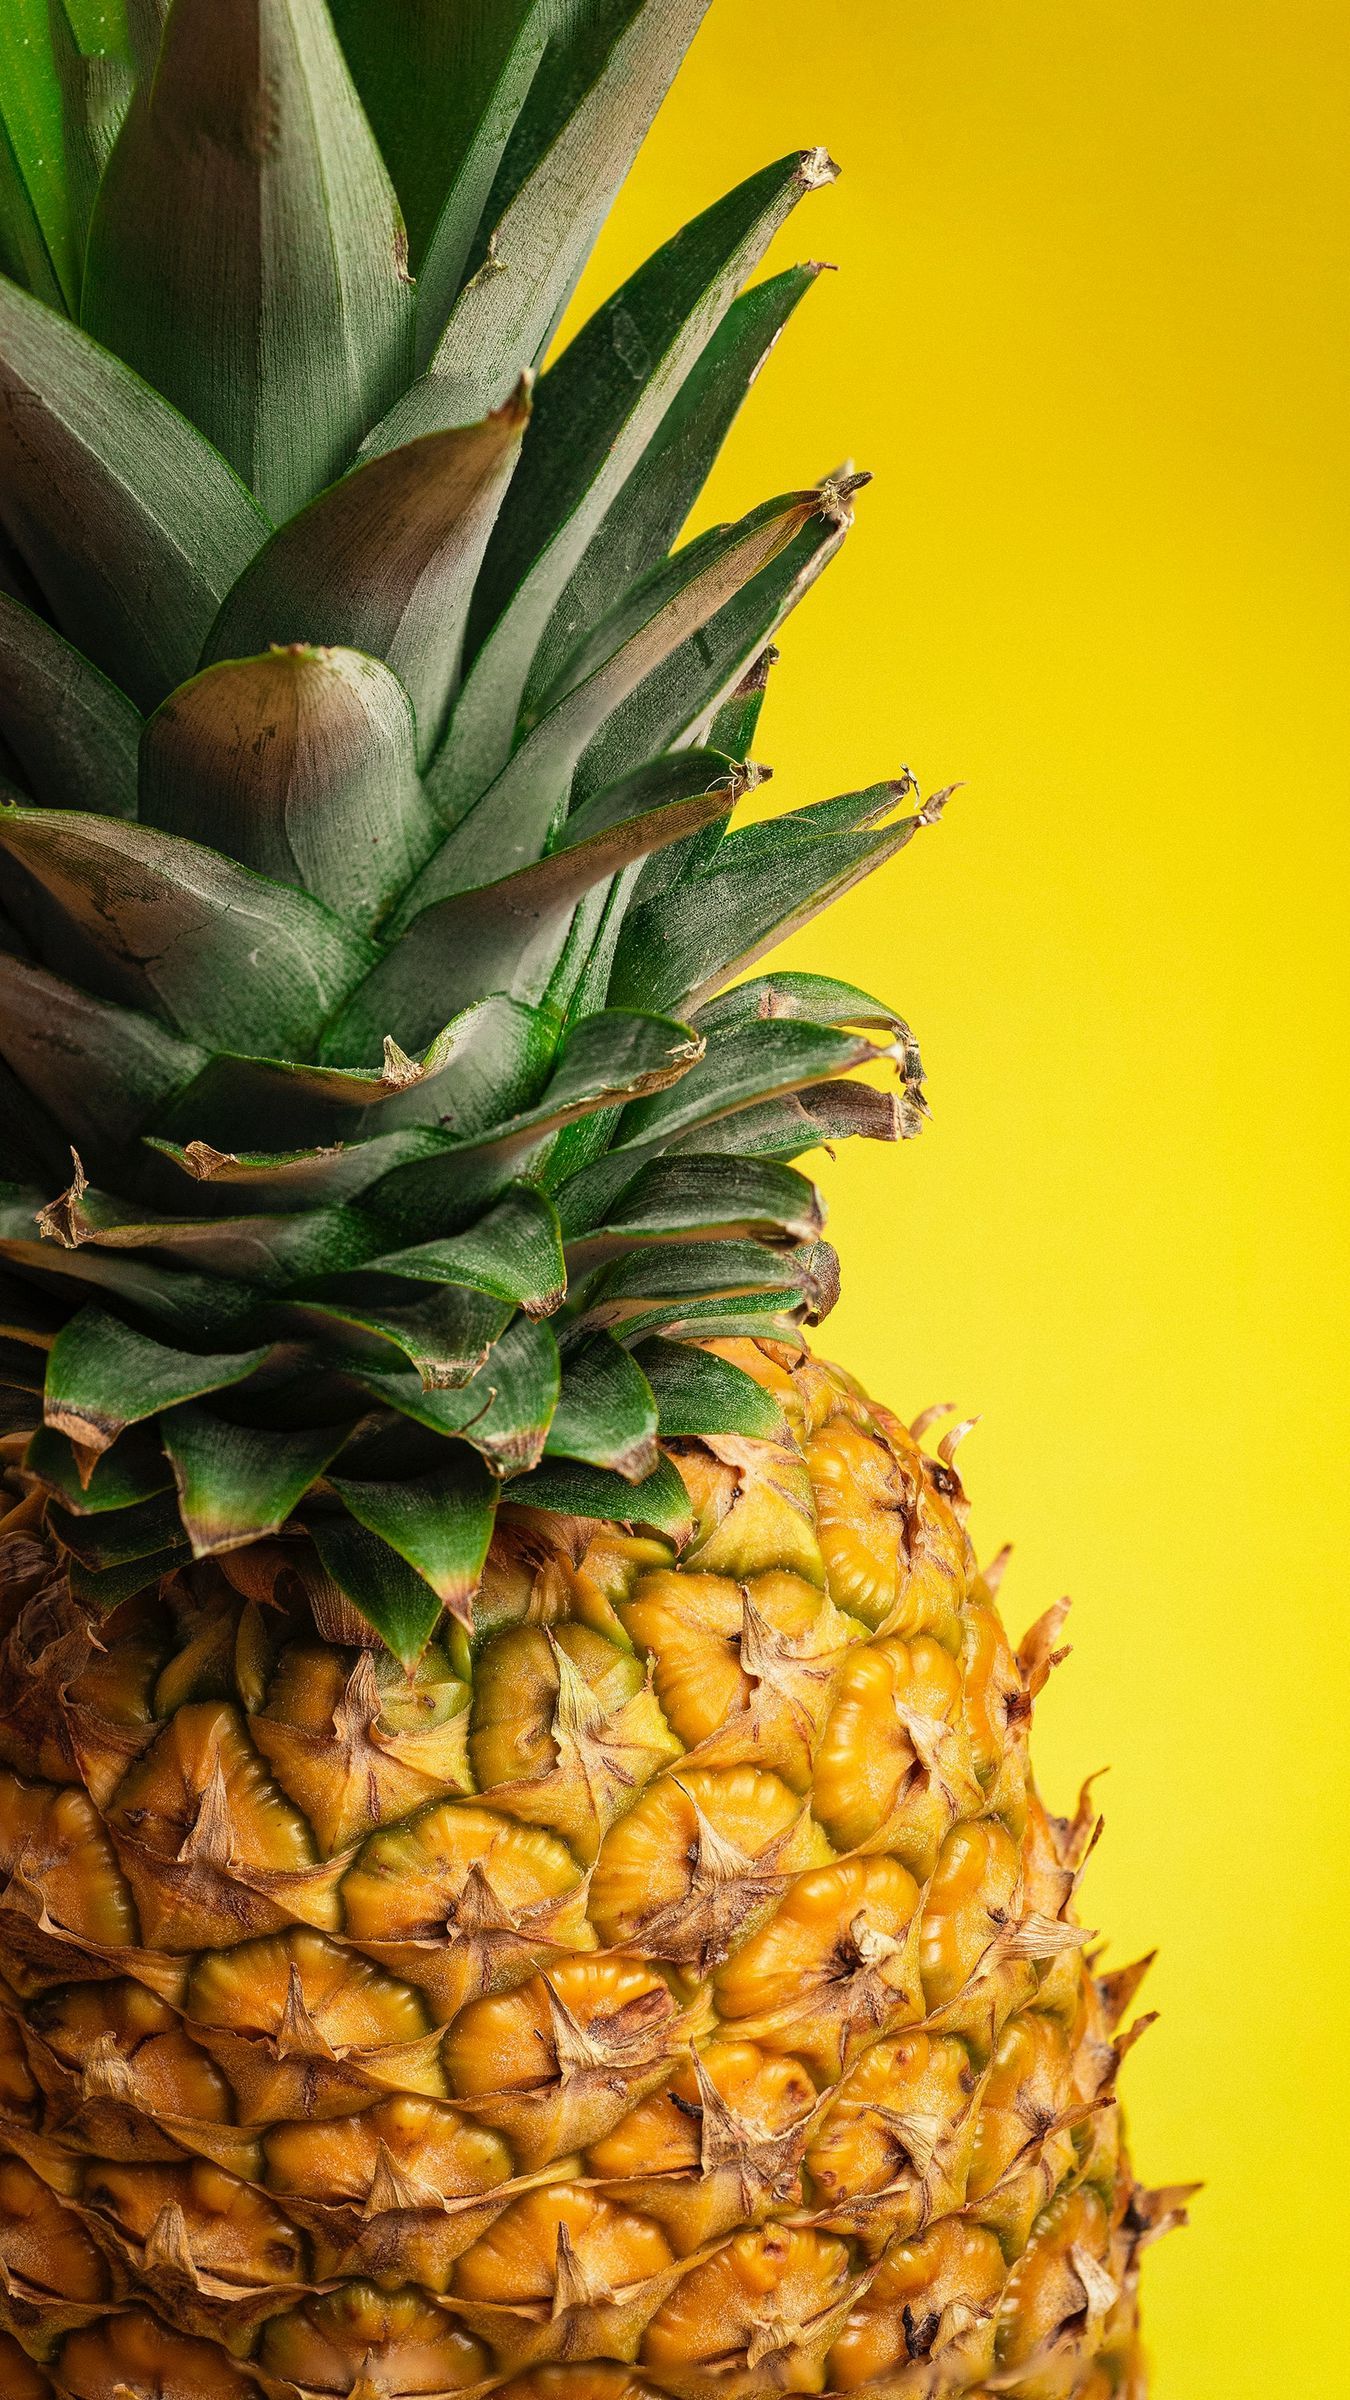 Download wallpaper 1350x2400 pineapple, fruit, tropical, yellow iphone 8+/7+/6s+/for parallax HD background